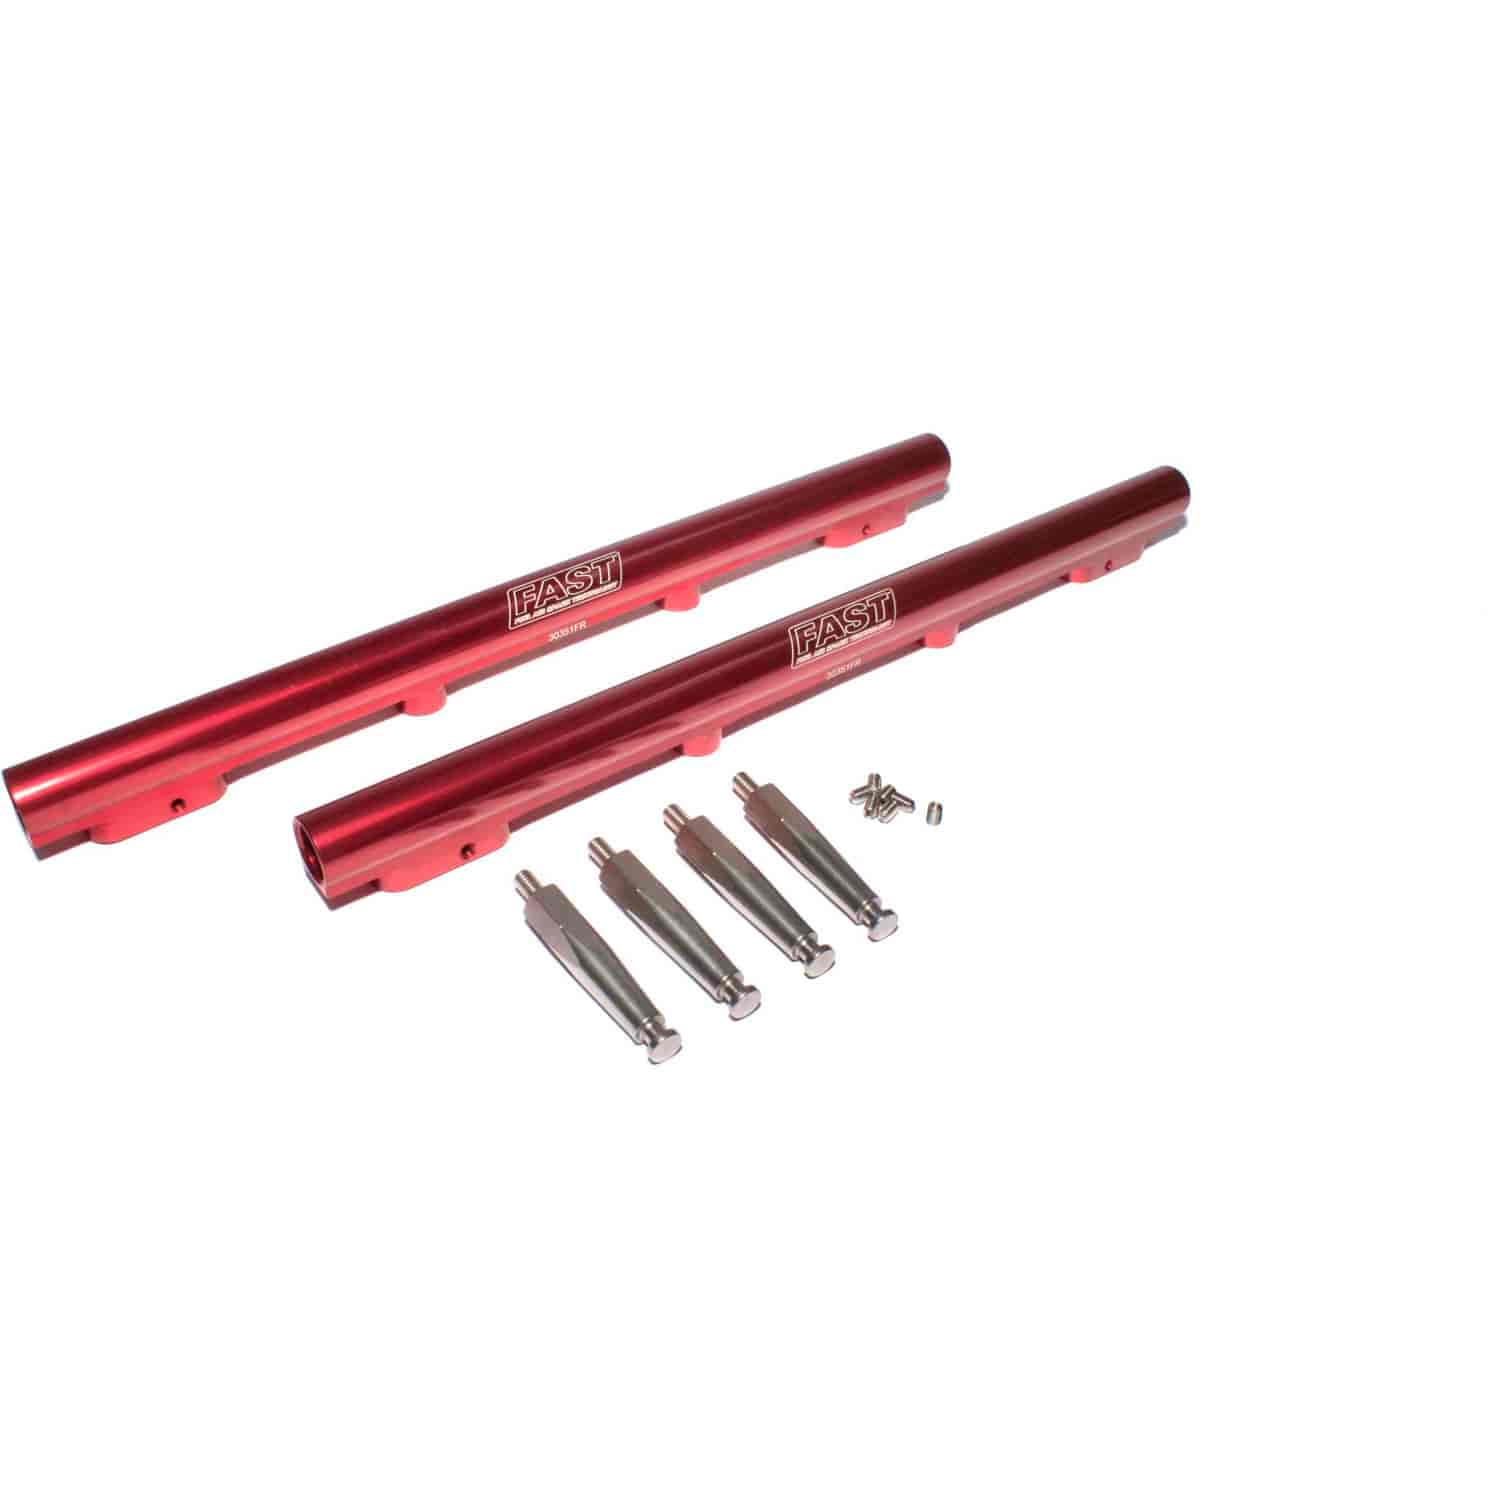 FUEL RAIL KIT FOR FAST 3031302/3035351